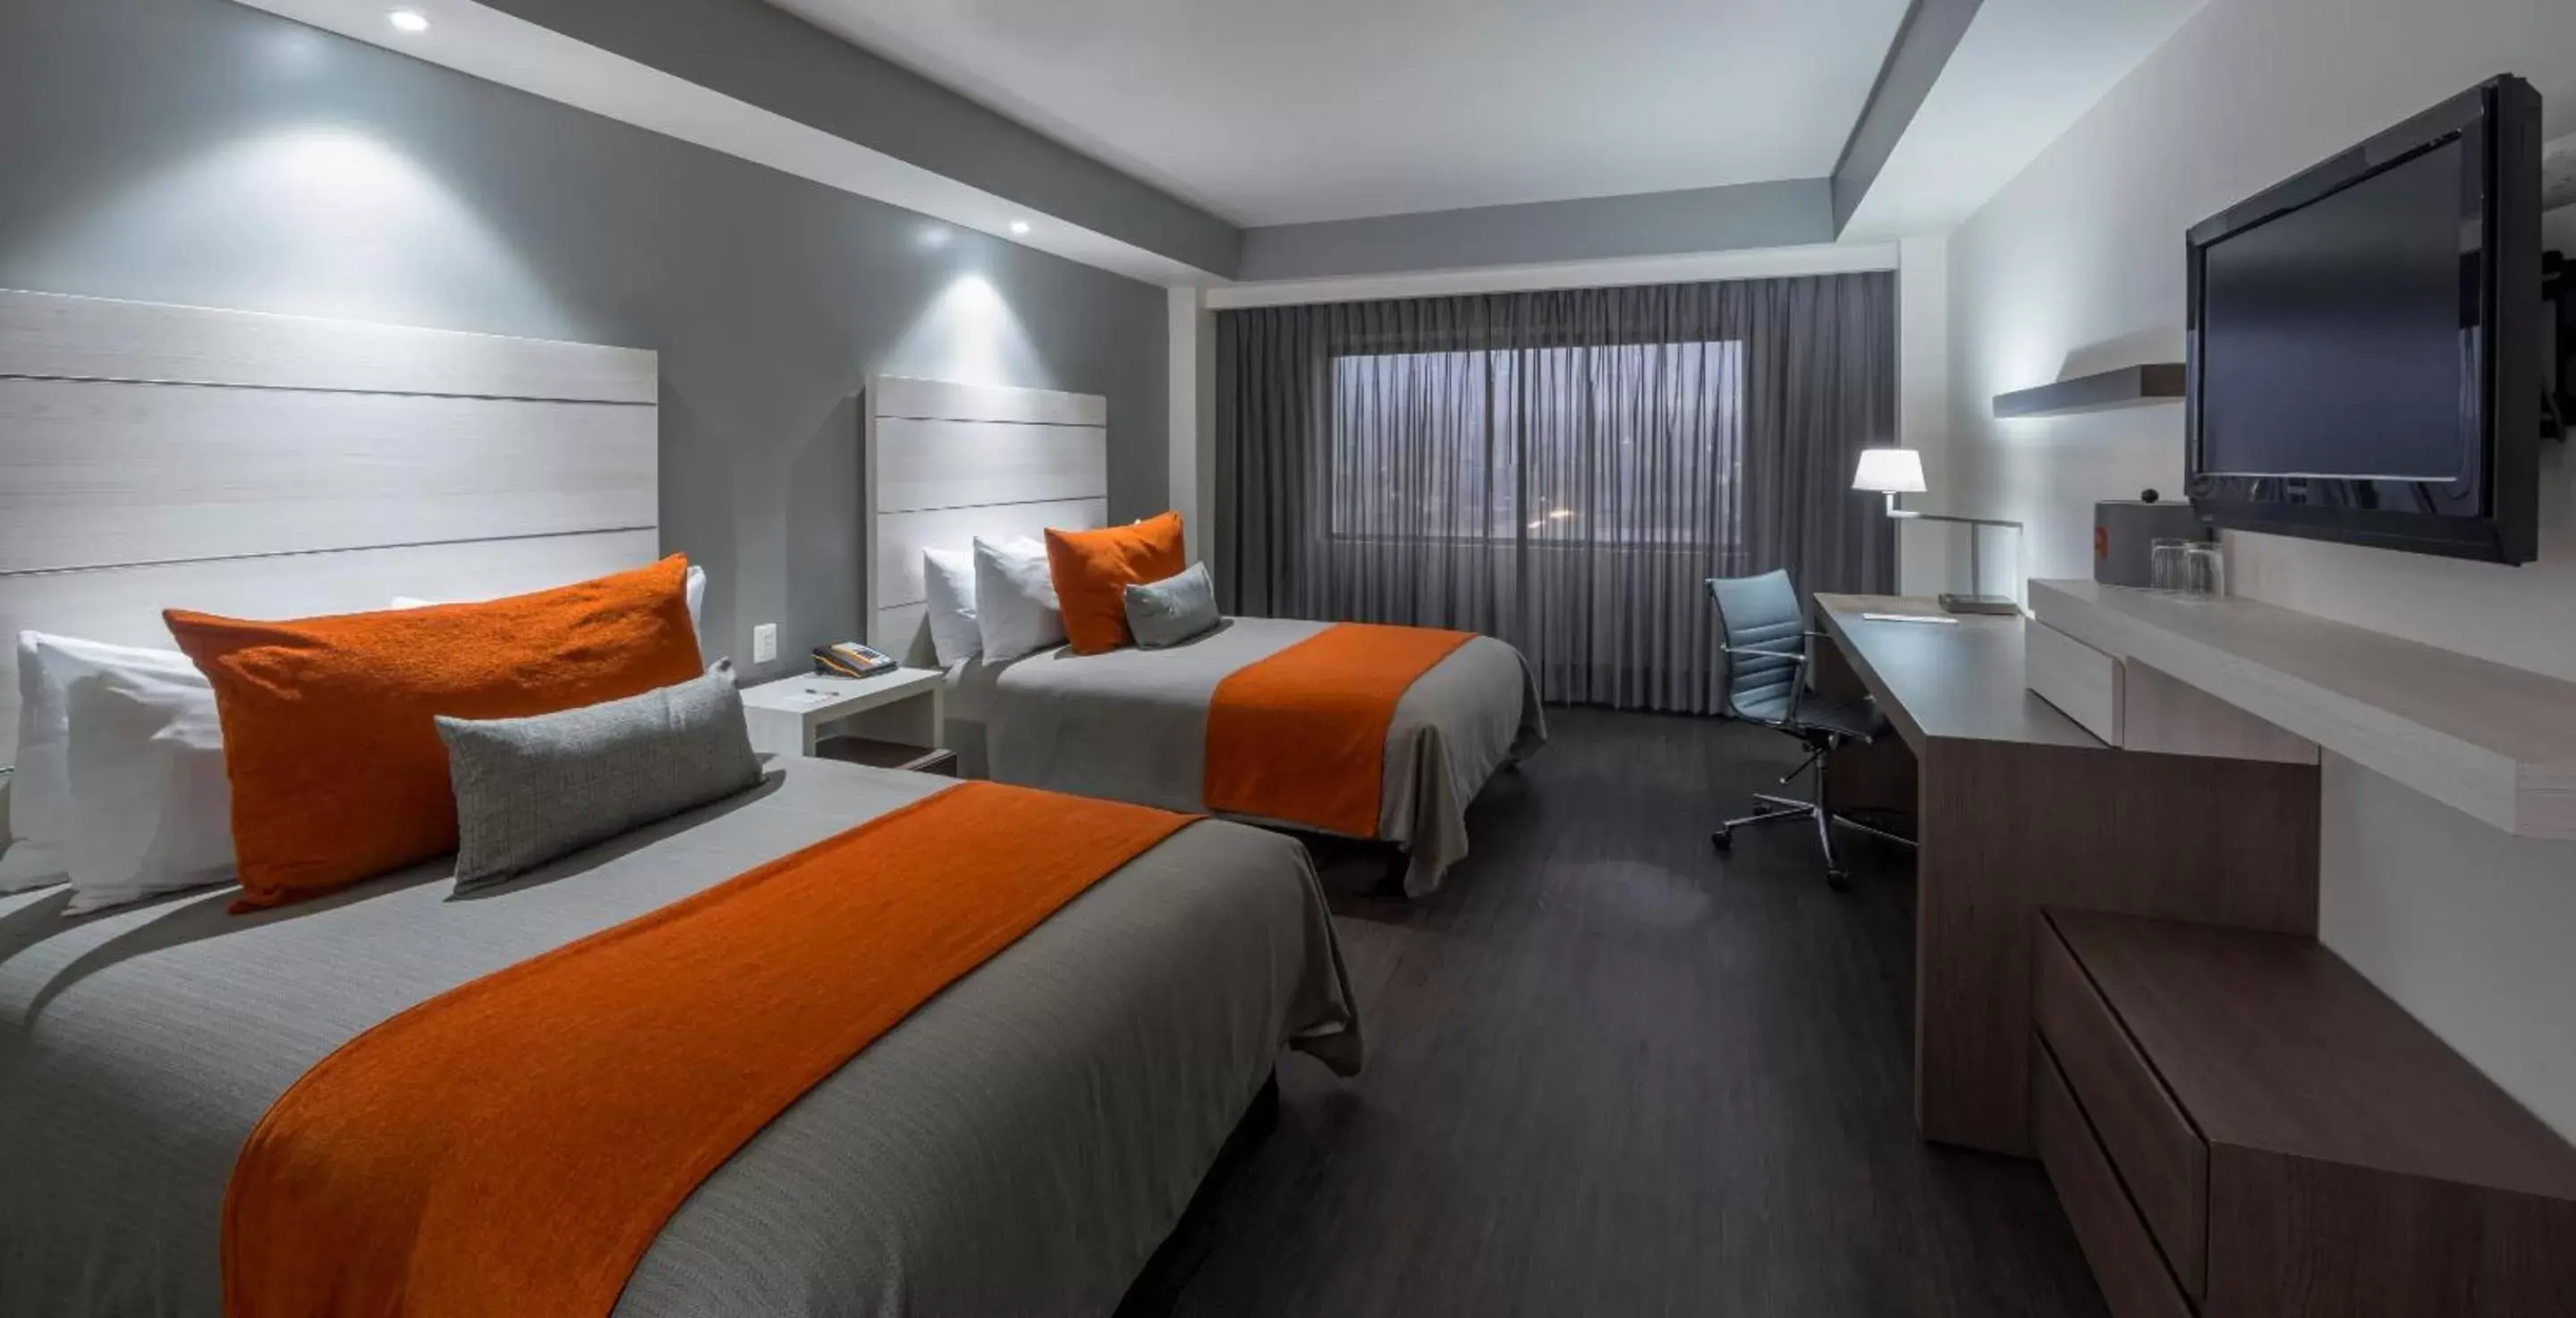 Photo of the whole room, Bed in Real Inn Tijuana by Camino Real Hotels